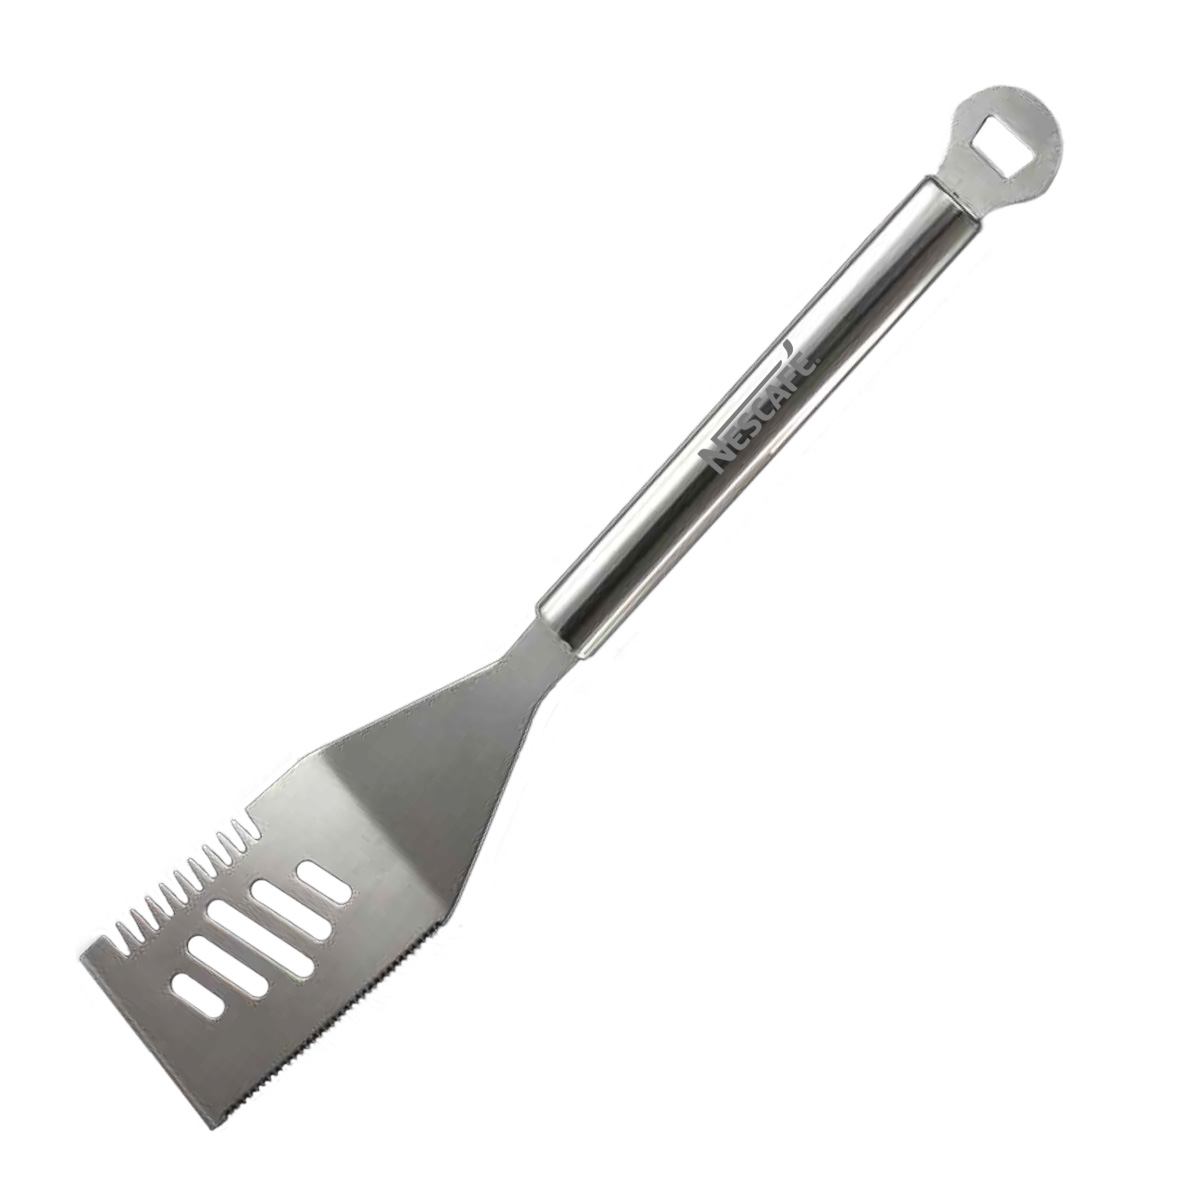 OVERSIZED STAINLESS STEEL BARBEQUE SLOTTED TURNER